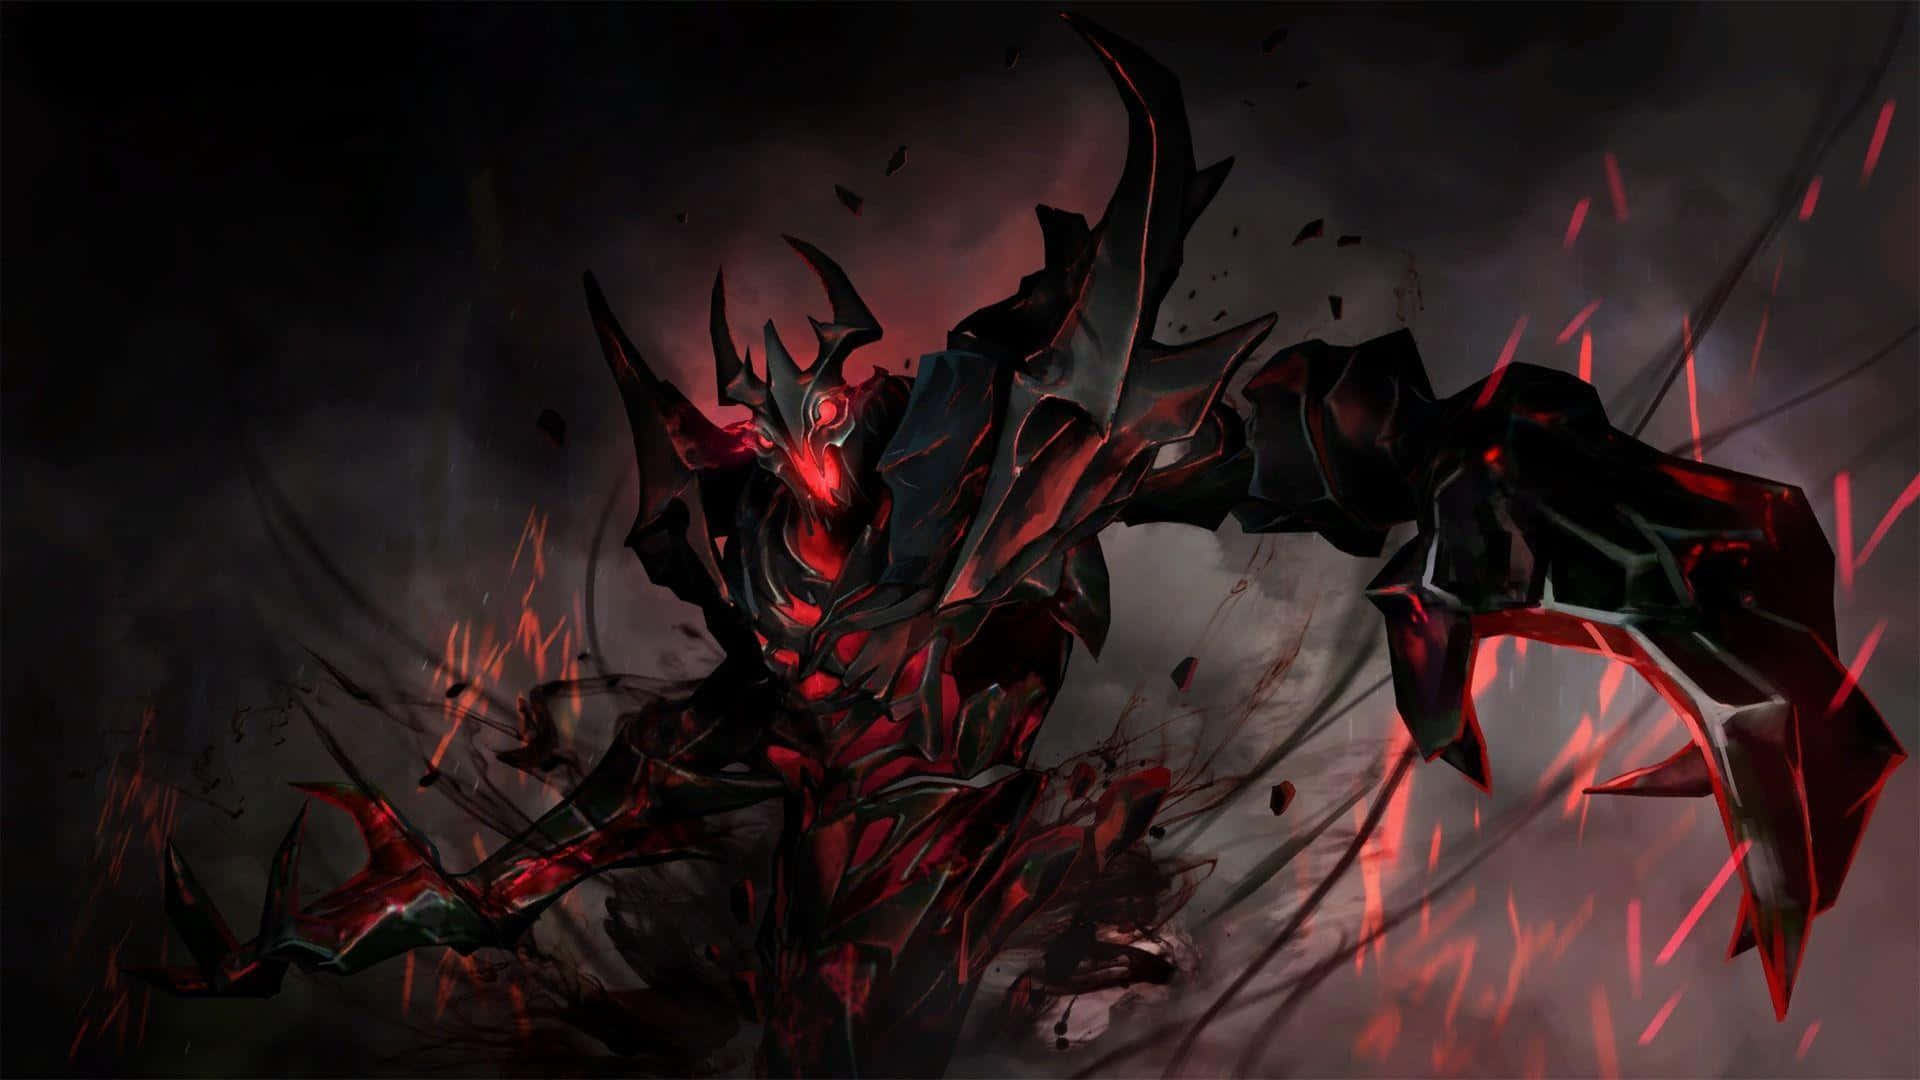 Menacing Shadow Fiend prepares for battle in the mystical realm Wallpaper